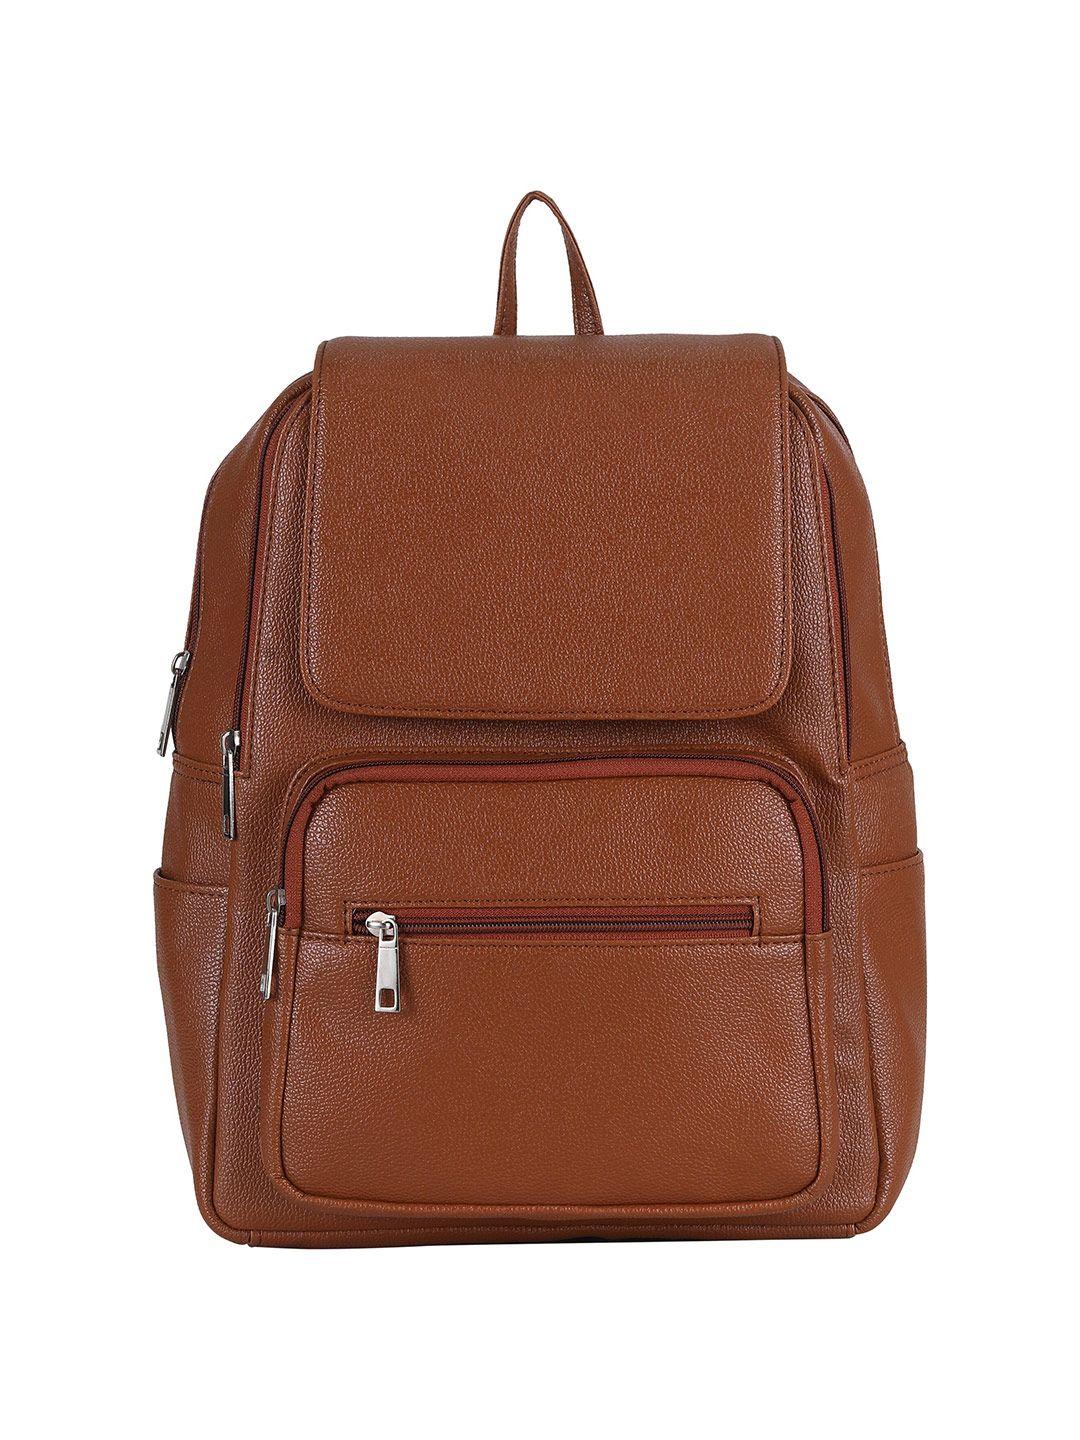 mast & harbour women tan pu backpack - up to 15 inch